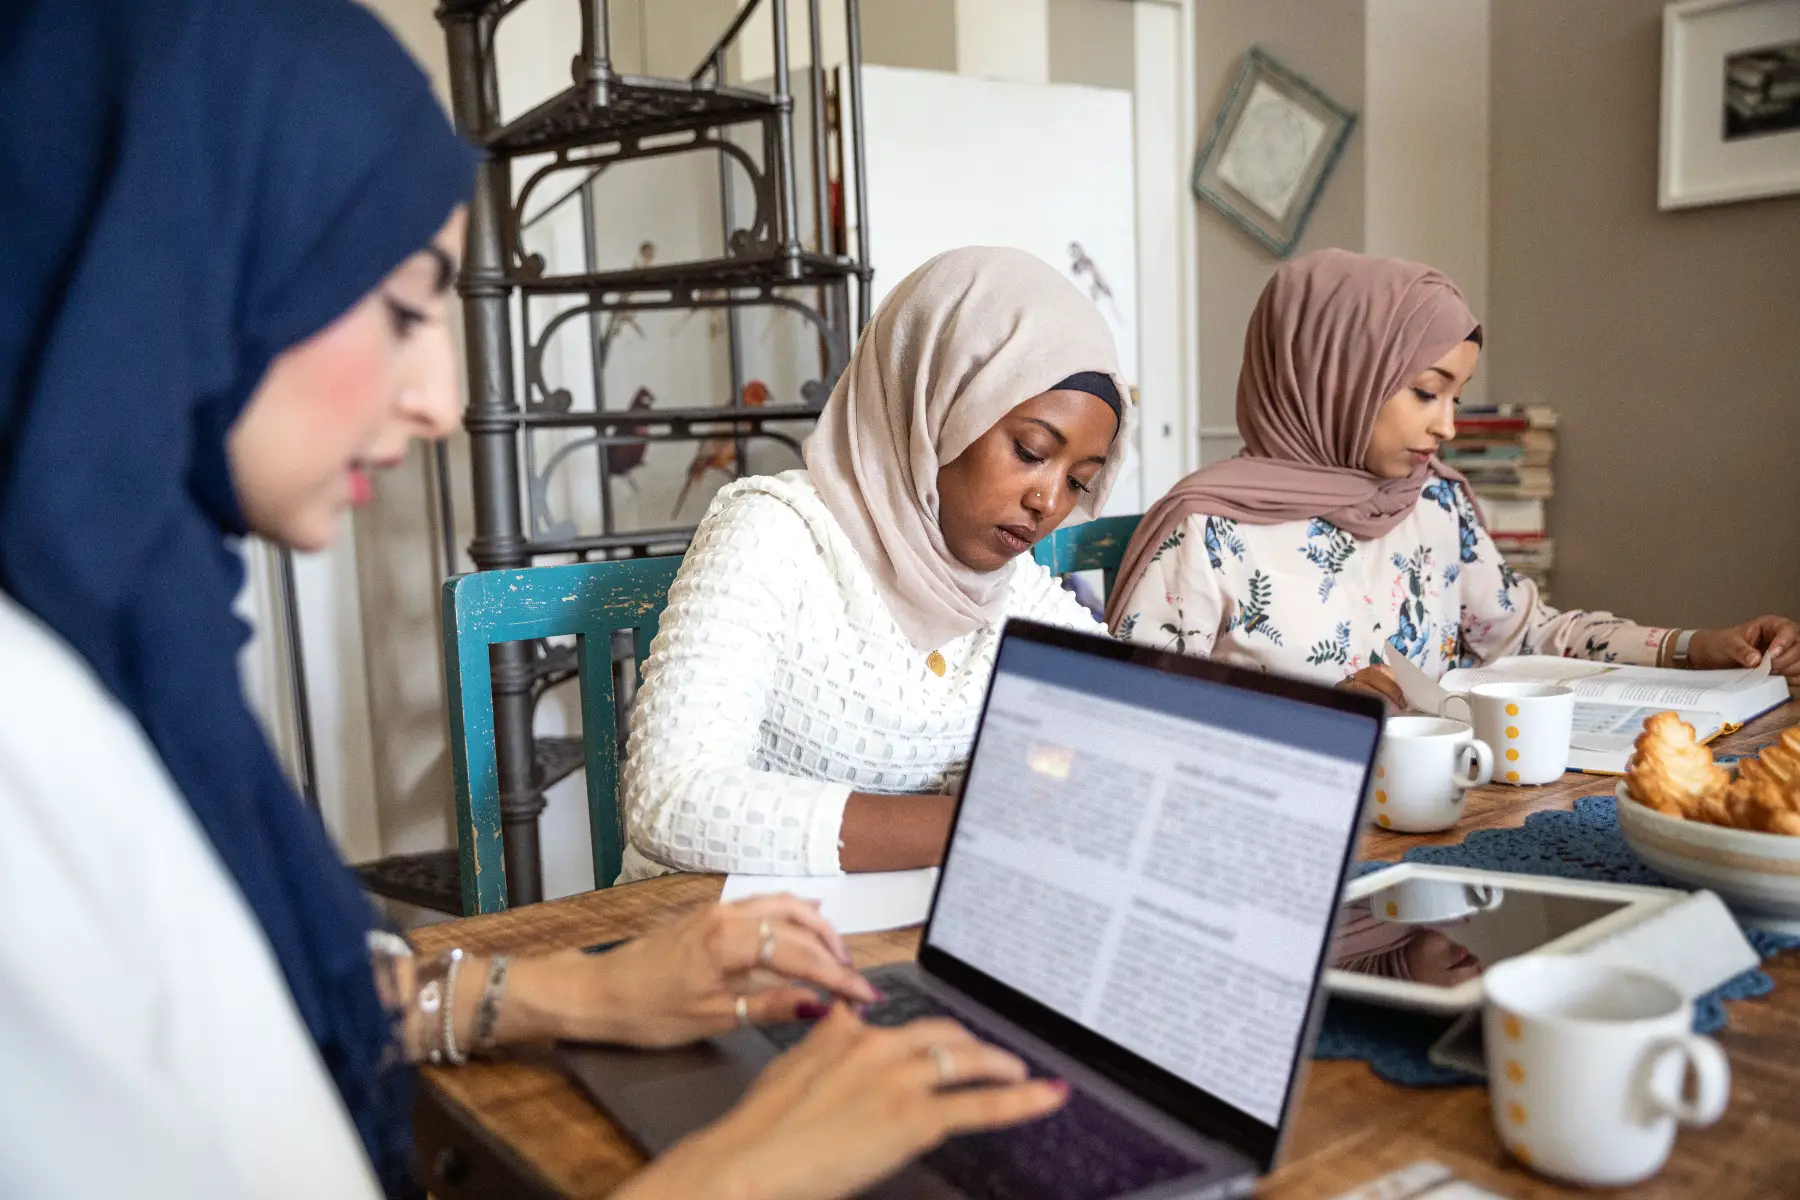 Three women with headscarves studying at home, one is working on a laptop.